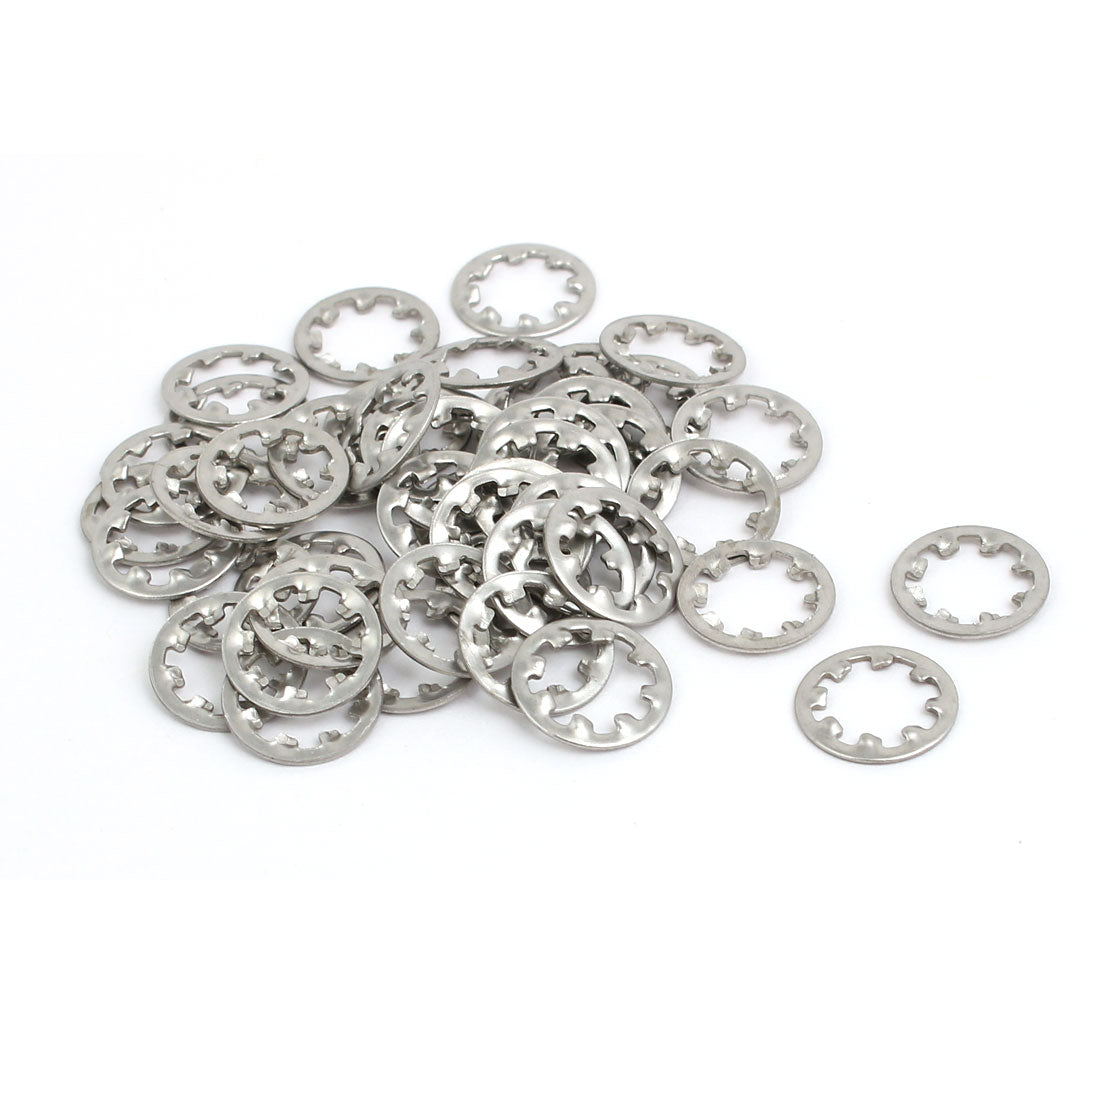 uxcell Uxcell 6mm Inner Dia Stainless Steel Internal Tooth Lock Washer Silver Tone 50pcs